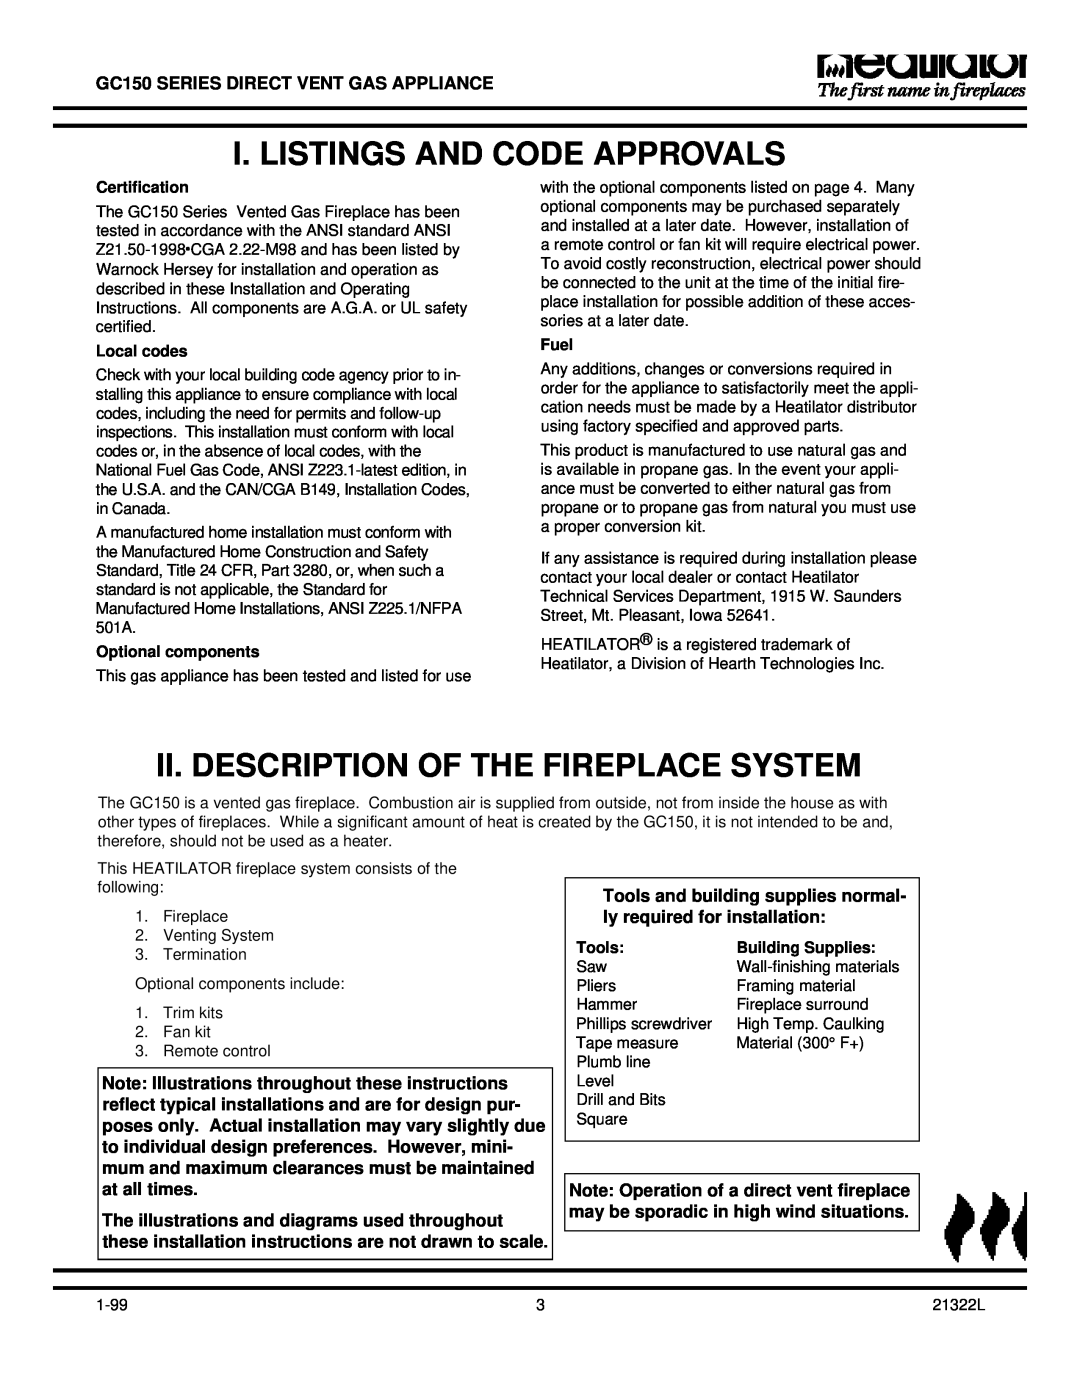 Heatiator GC150 owner manual I. Listings And Code Approvals, Ii. Description Of The Fireplace System 